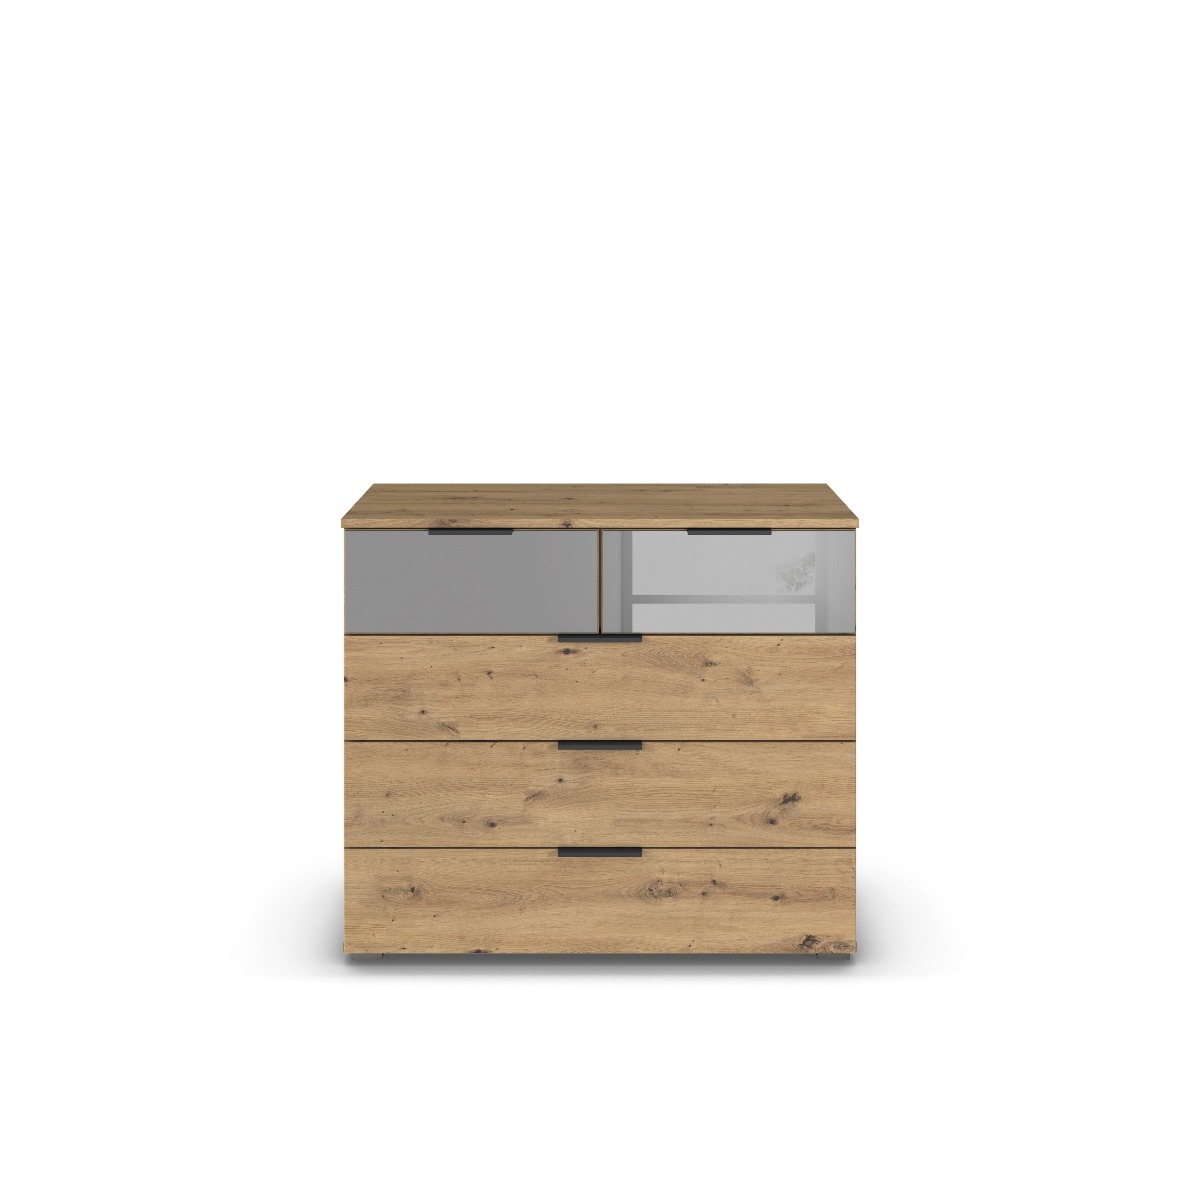 chest of drawers (5 drawers)